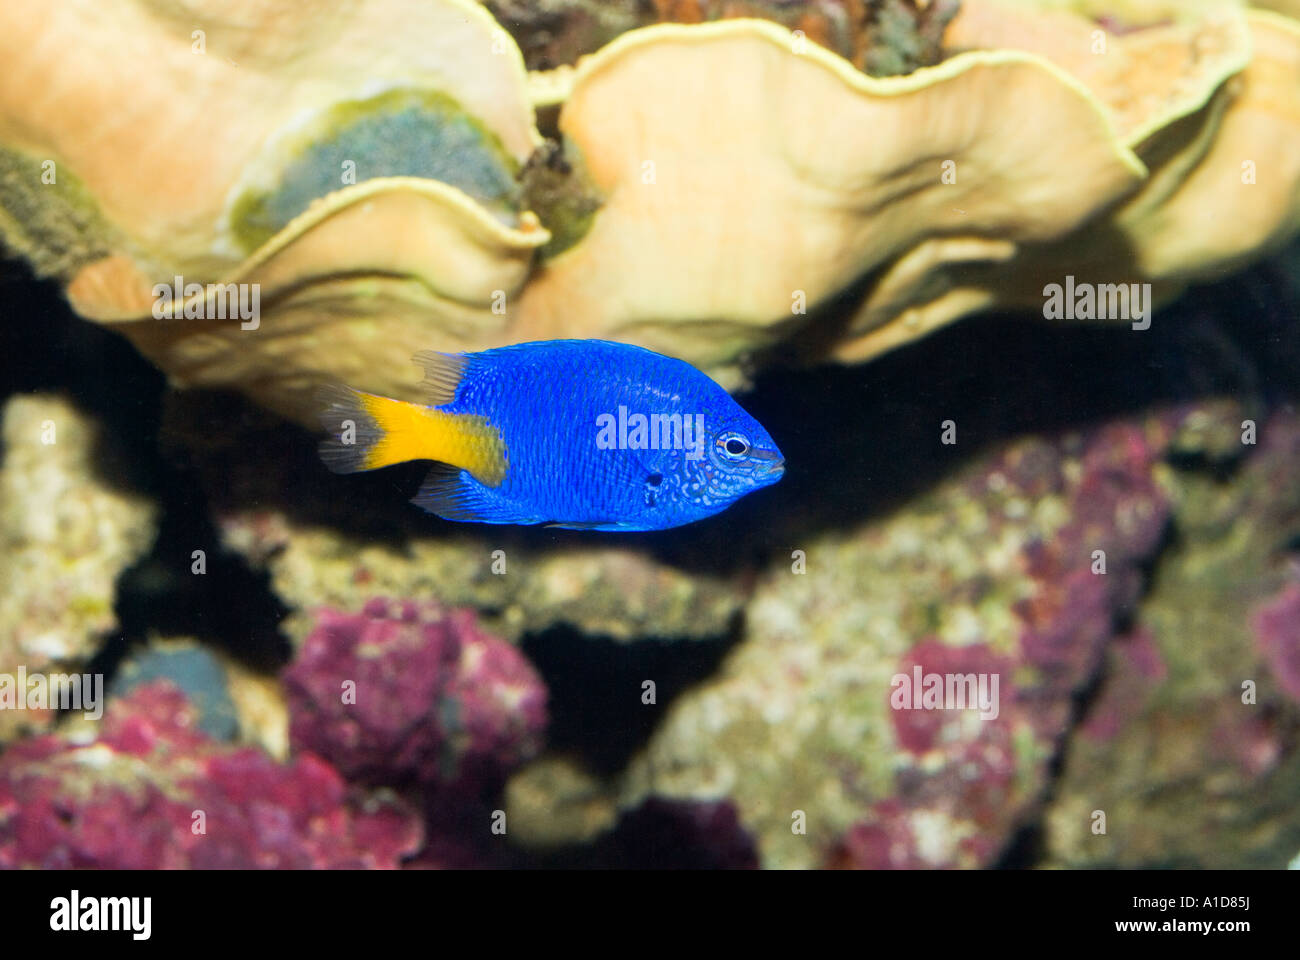 Blue Devil or Damselfish Damsel fish Chrysiptera cyanea yellow tail caudal  in front of mussel shell red algae algas Sapphire Stock Photo